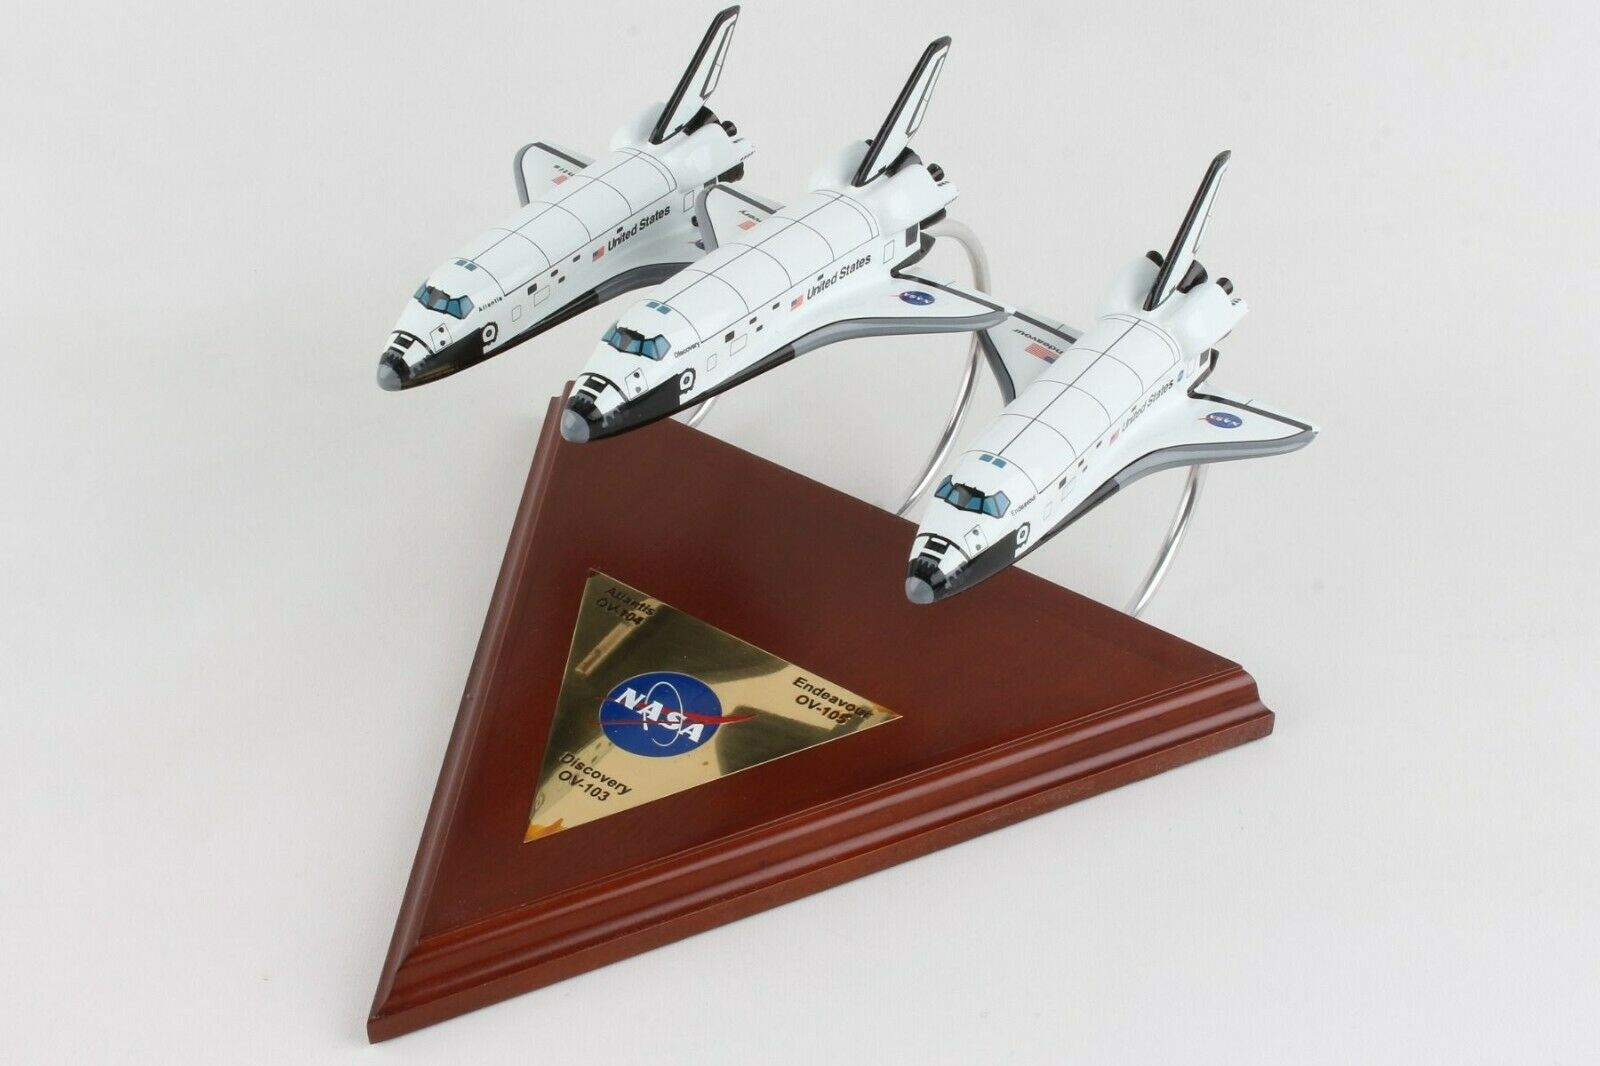 ALDO Hobbies & Creative Arts> Collectibles> Scale Model NASA US Space Shuttles Orbiters Atlantis, Endeavour and Discovery Wood Models Collection